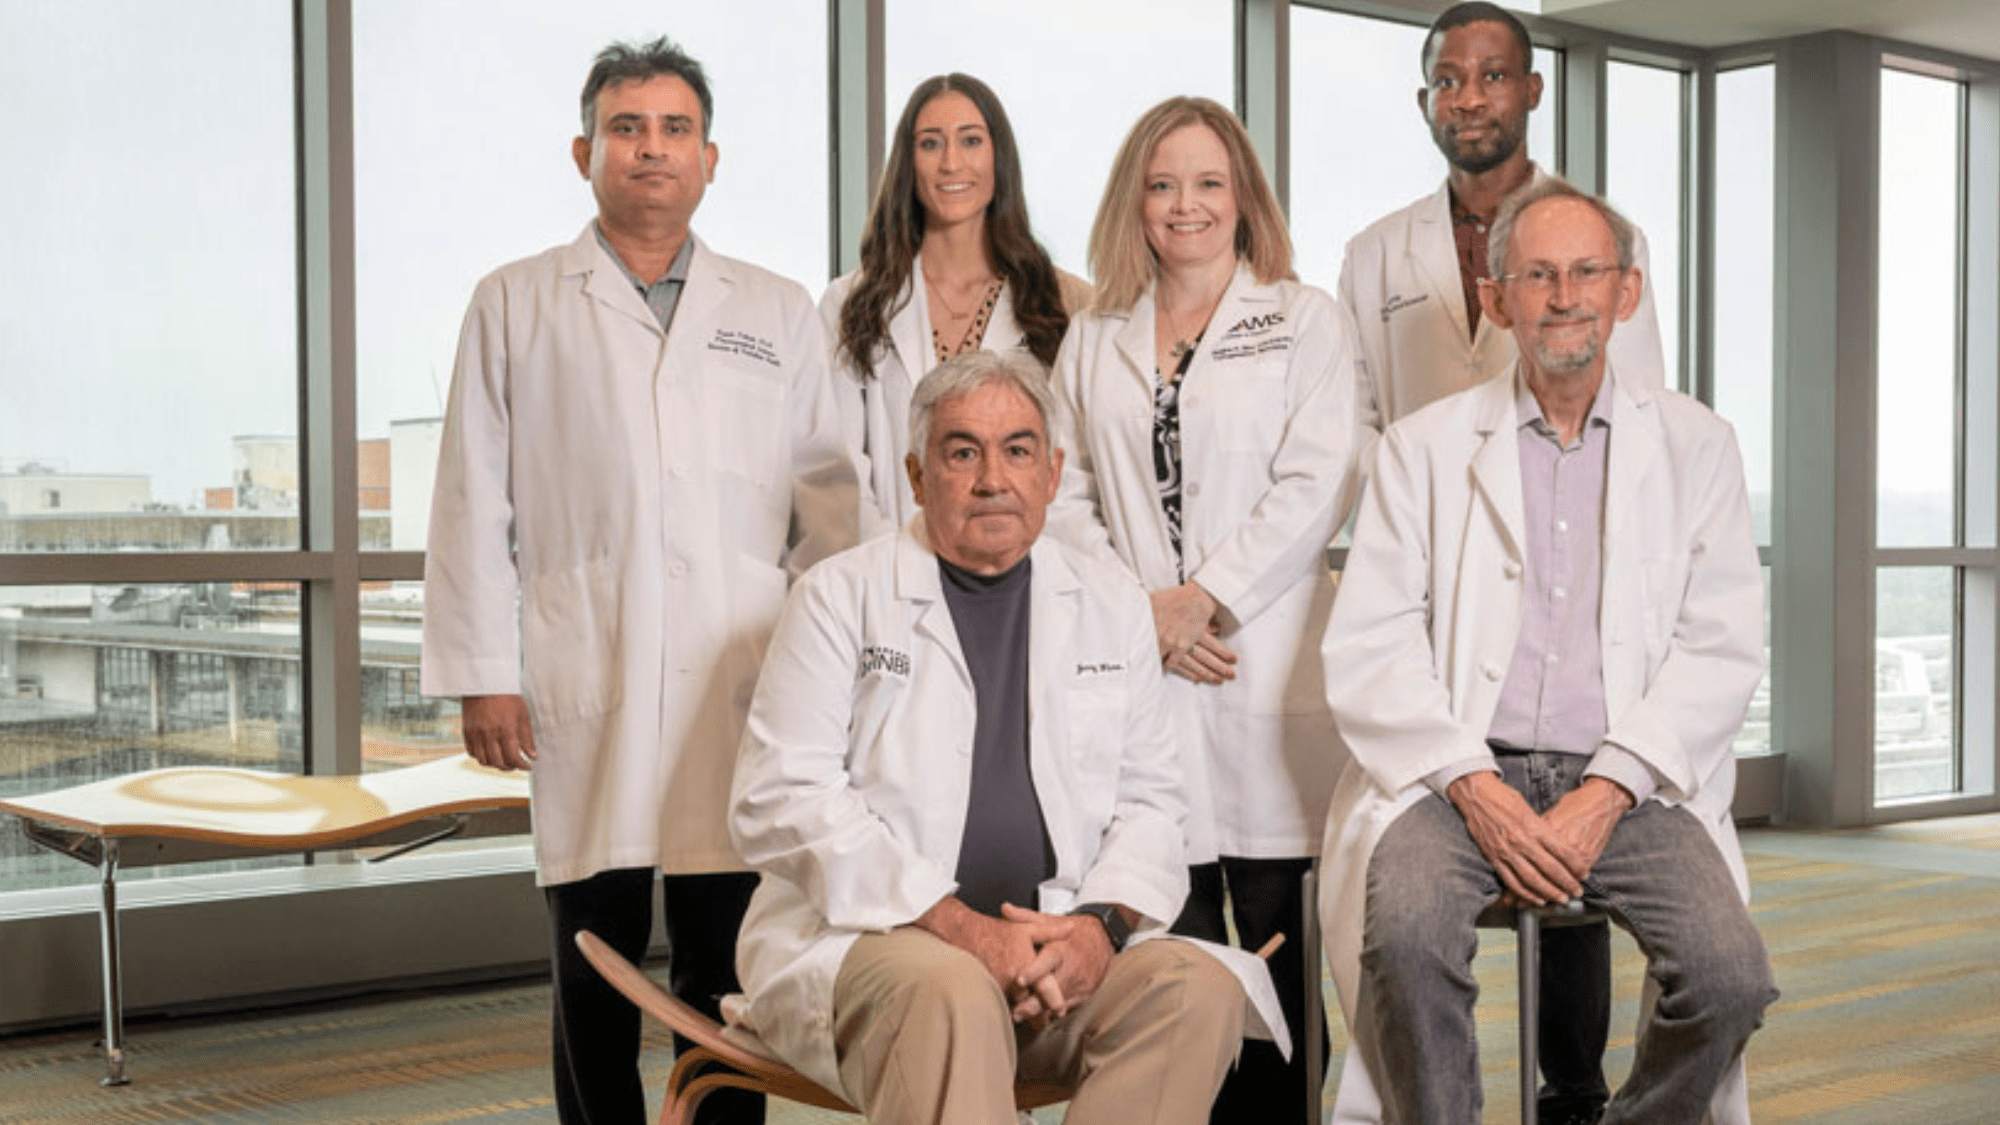 This UAMS research team was awarded $3.4 million dollars to study the effects of radiation